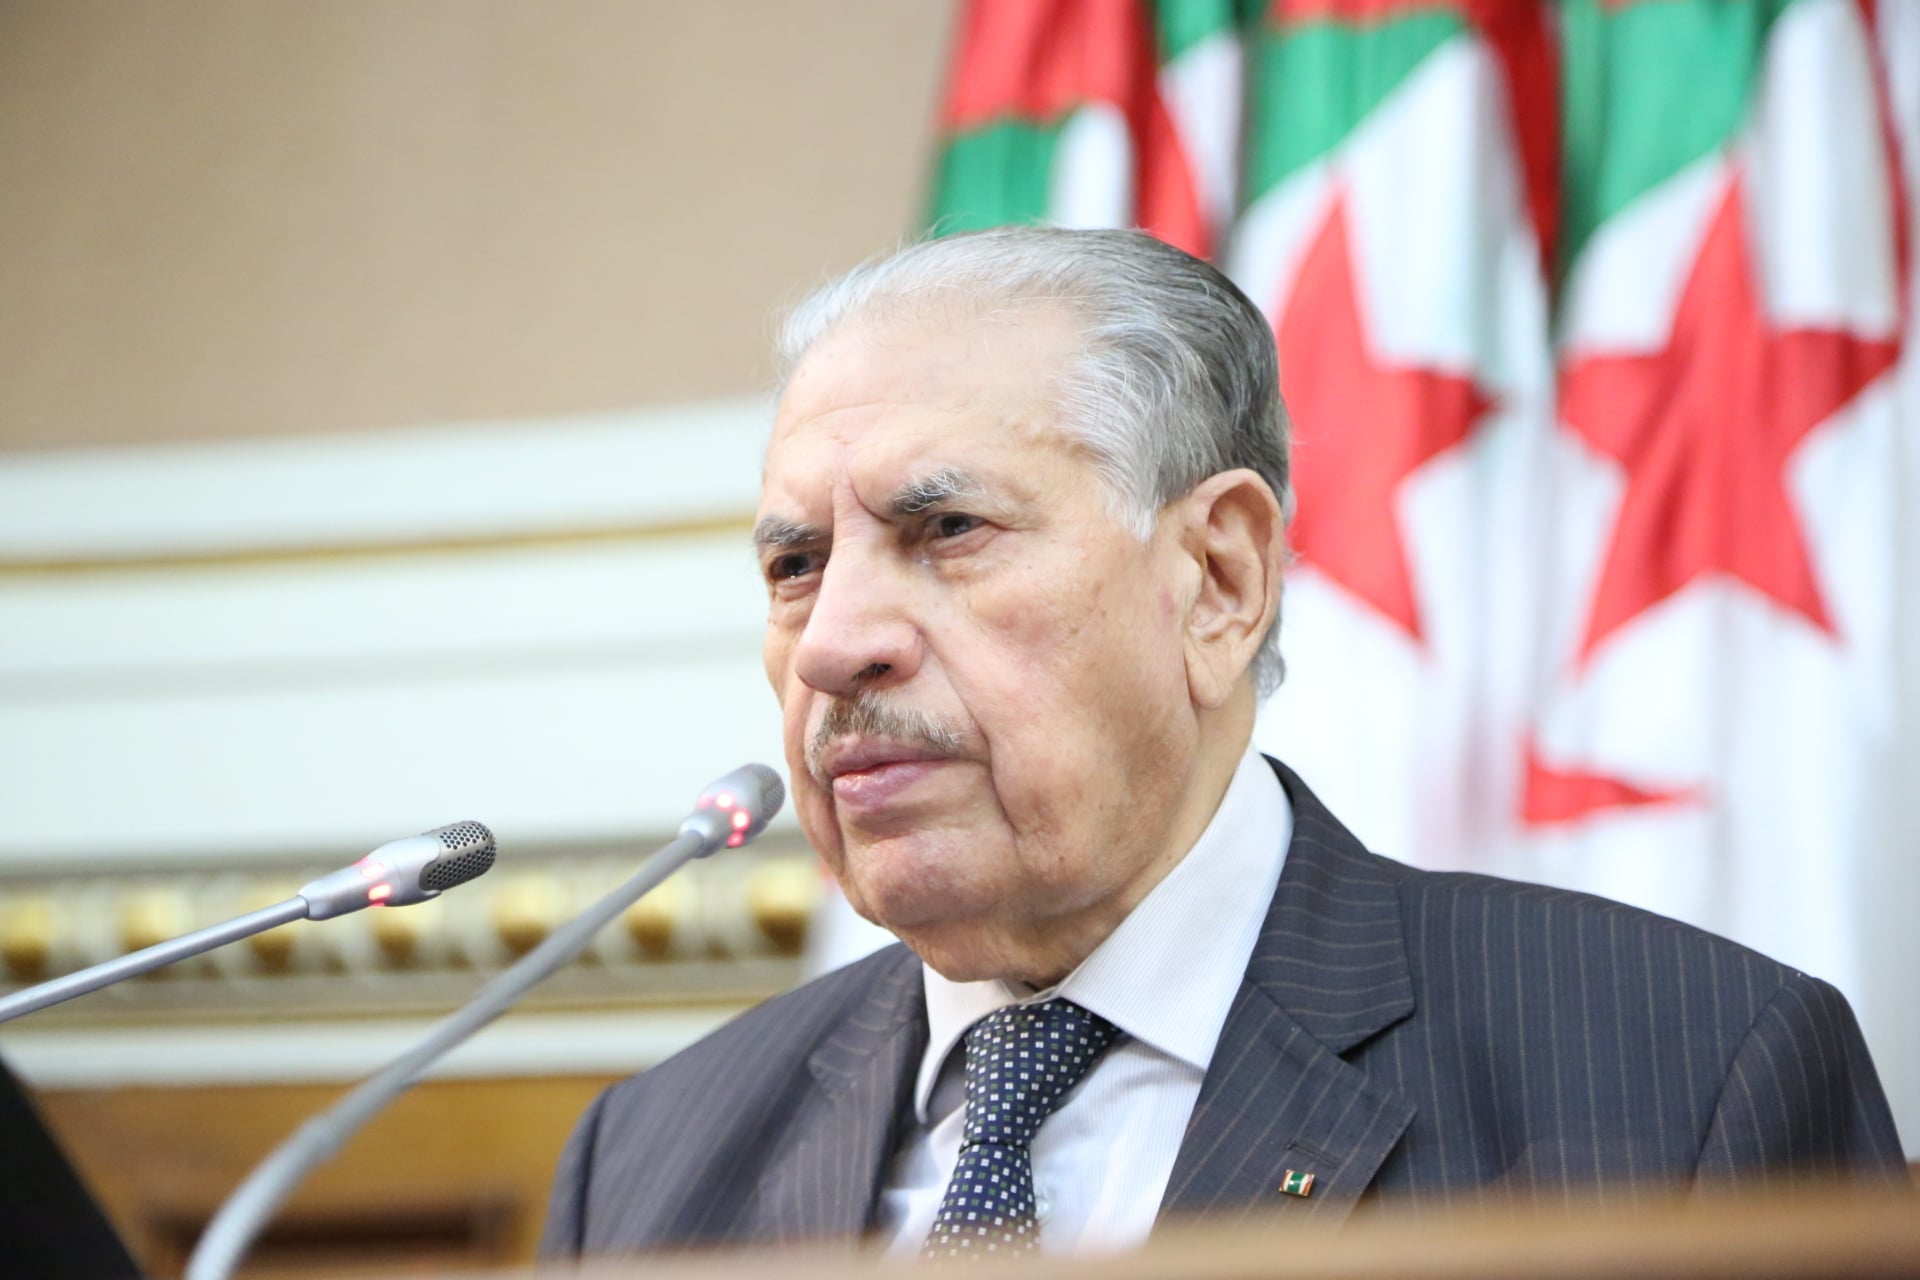 Speaker of the Algerian Council of the Nation: Action to Enhance Palestinian National Fabric